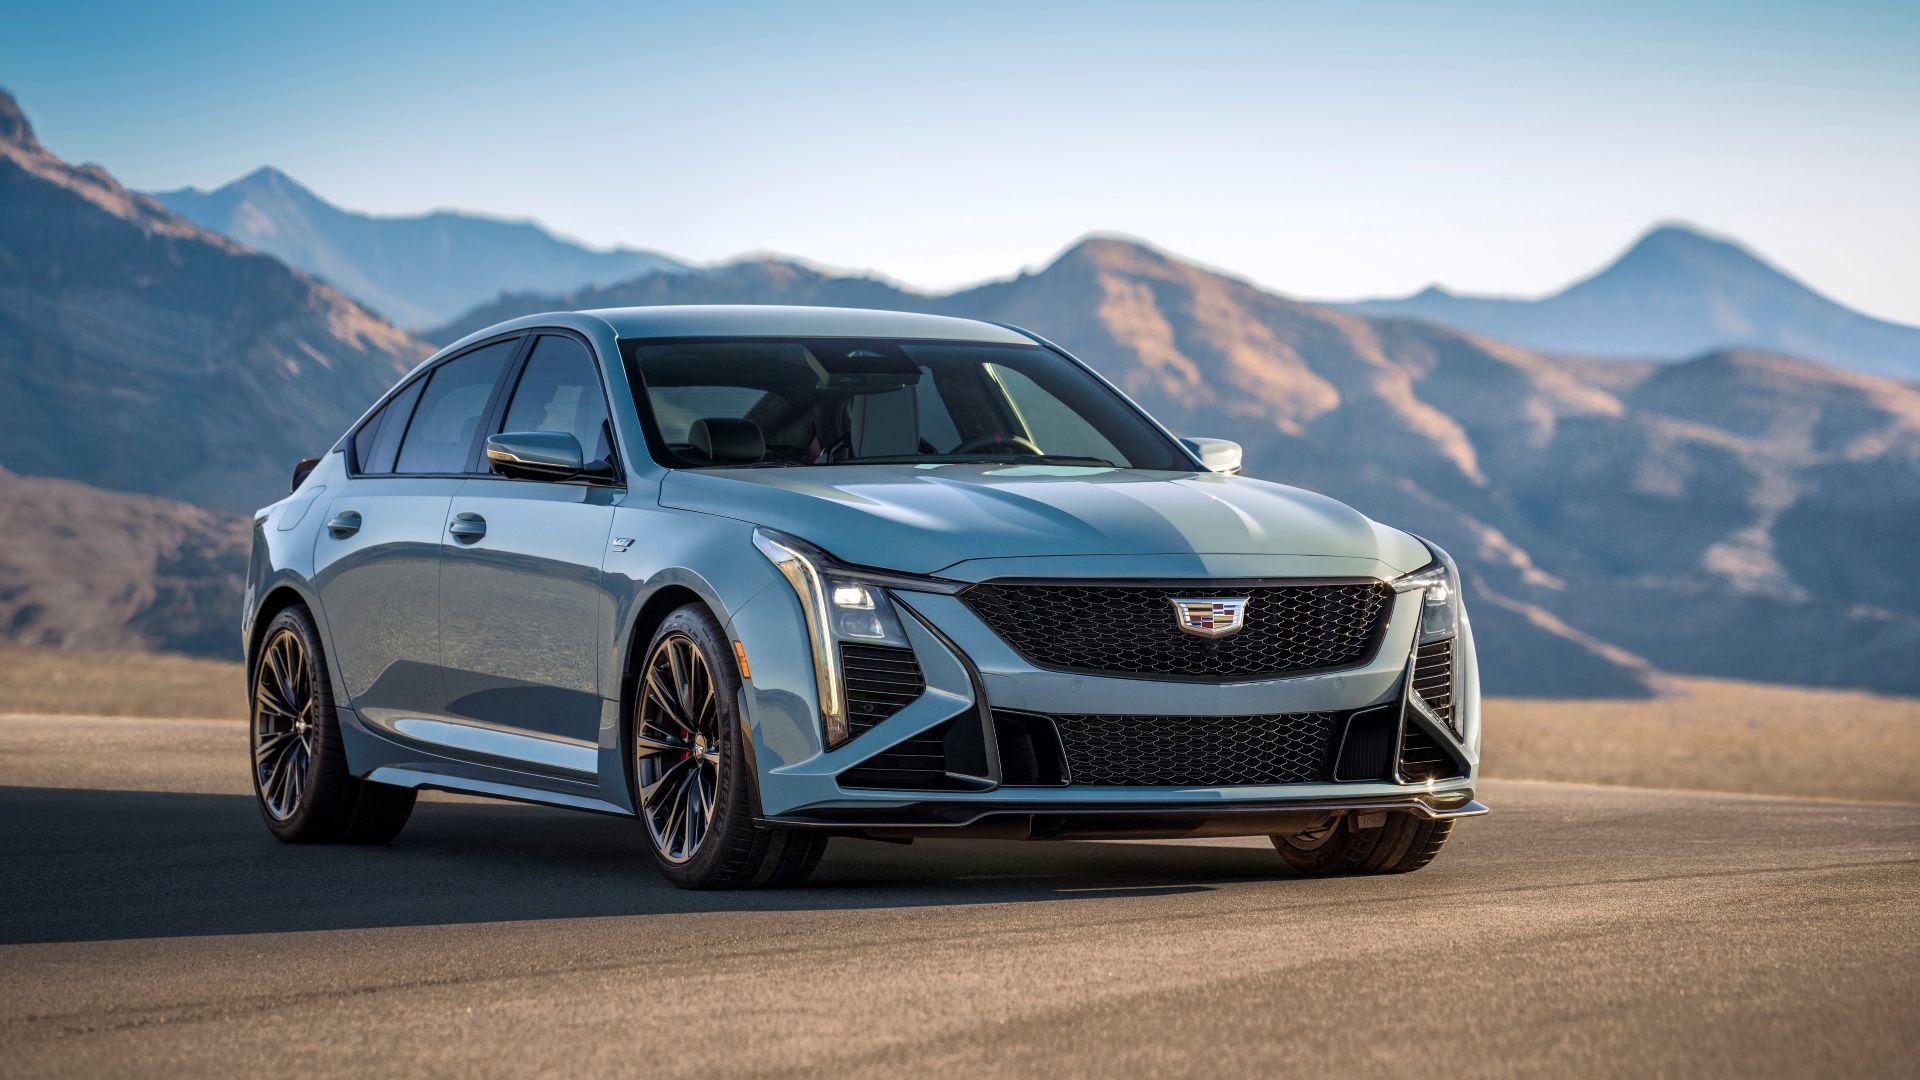 Front 3/4 shot of the new 2025 Cadillac CT5-V Blackwing